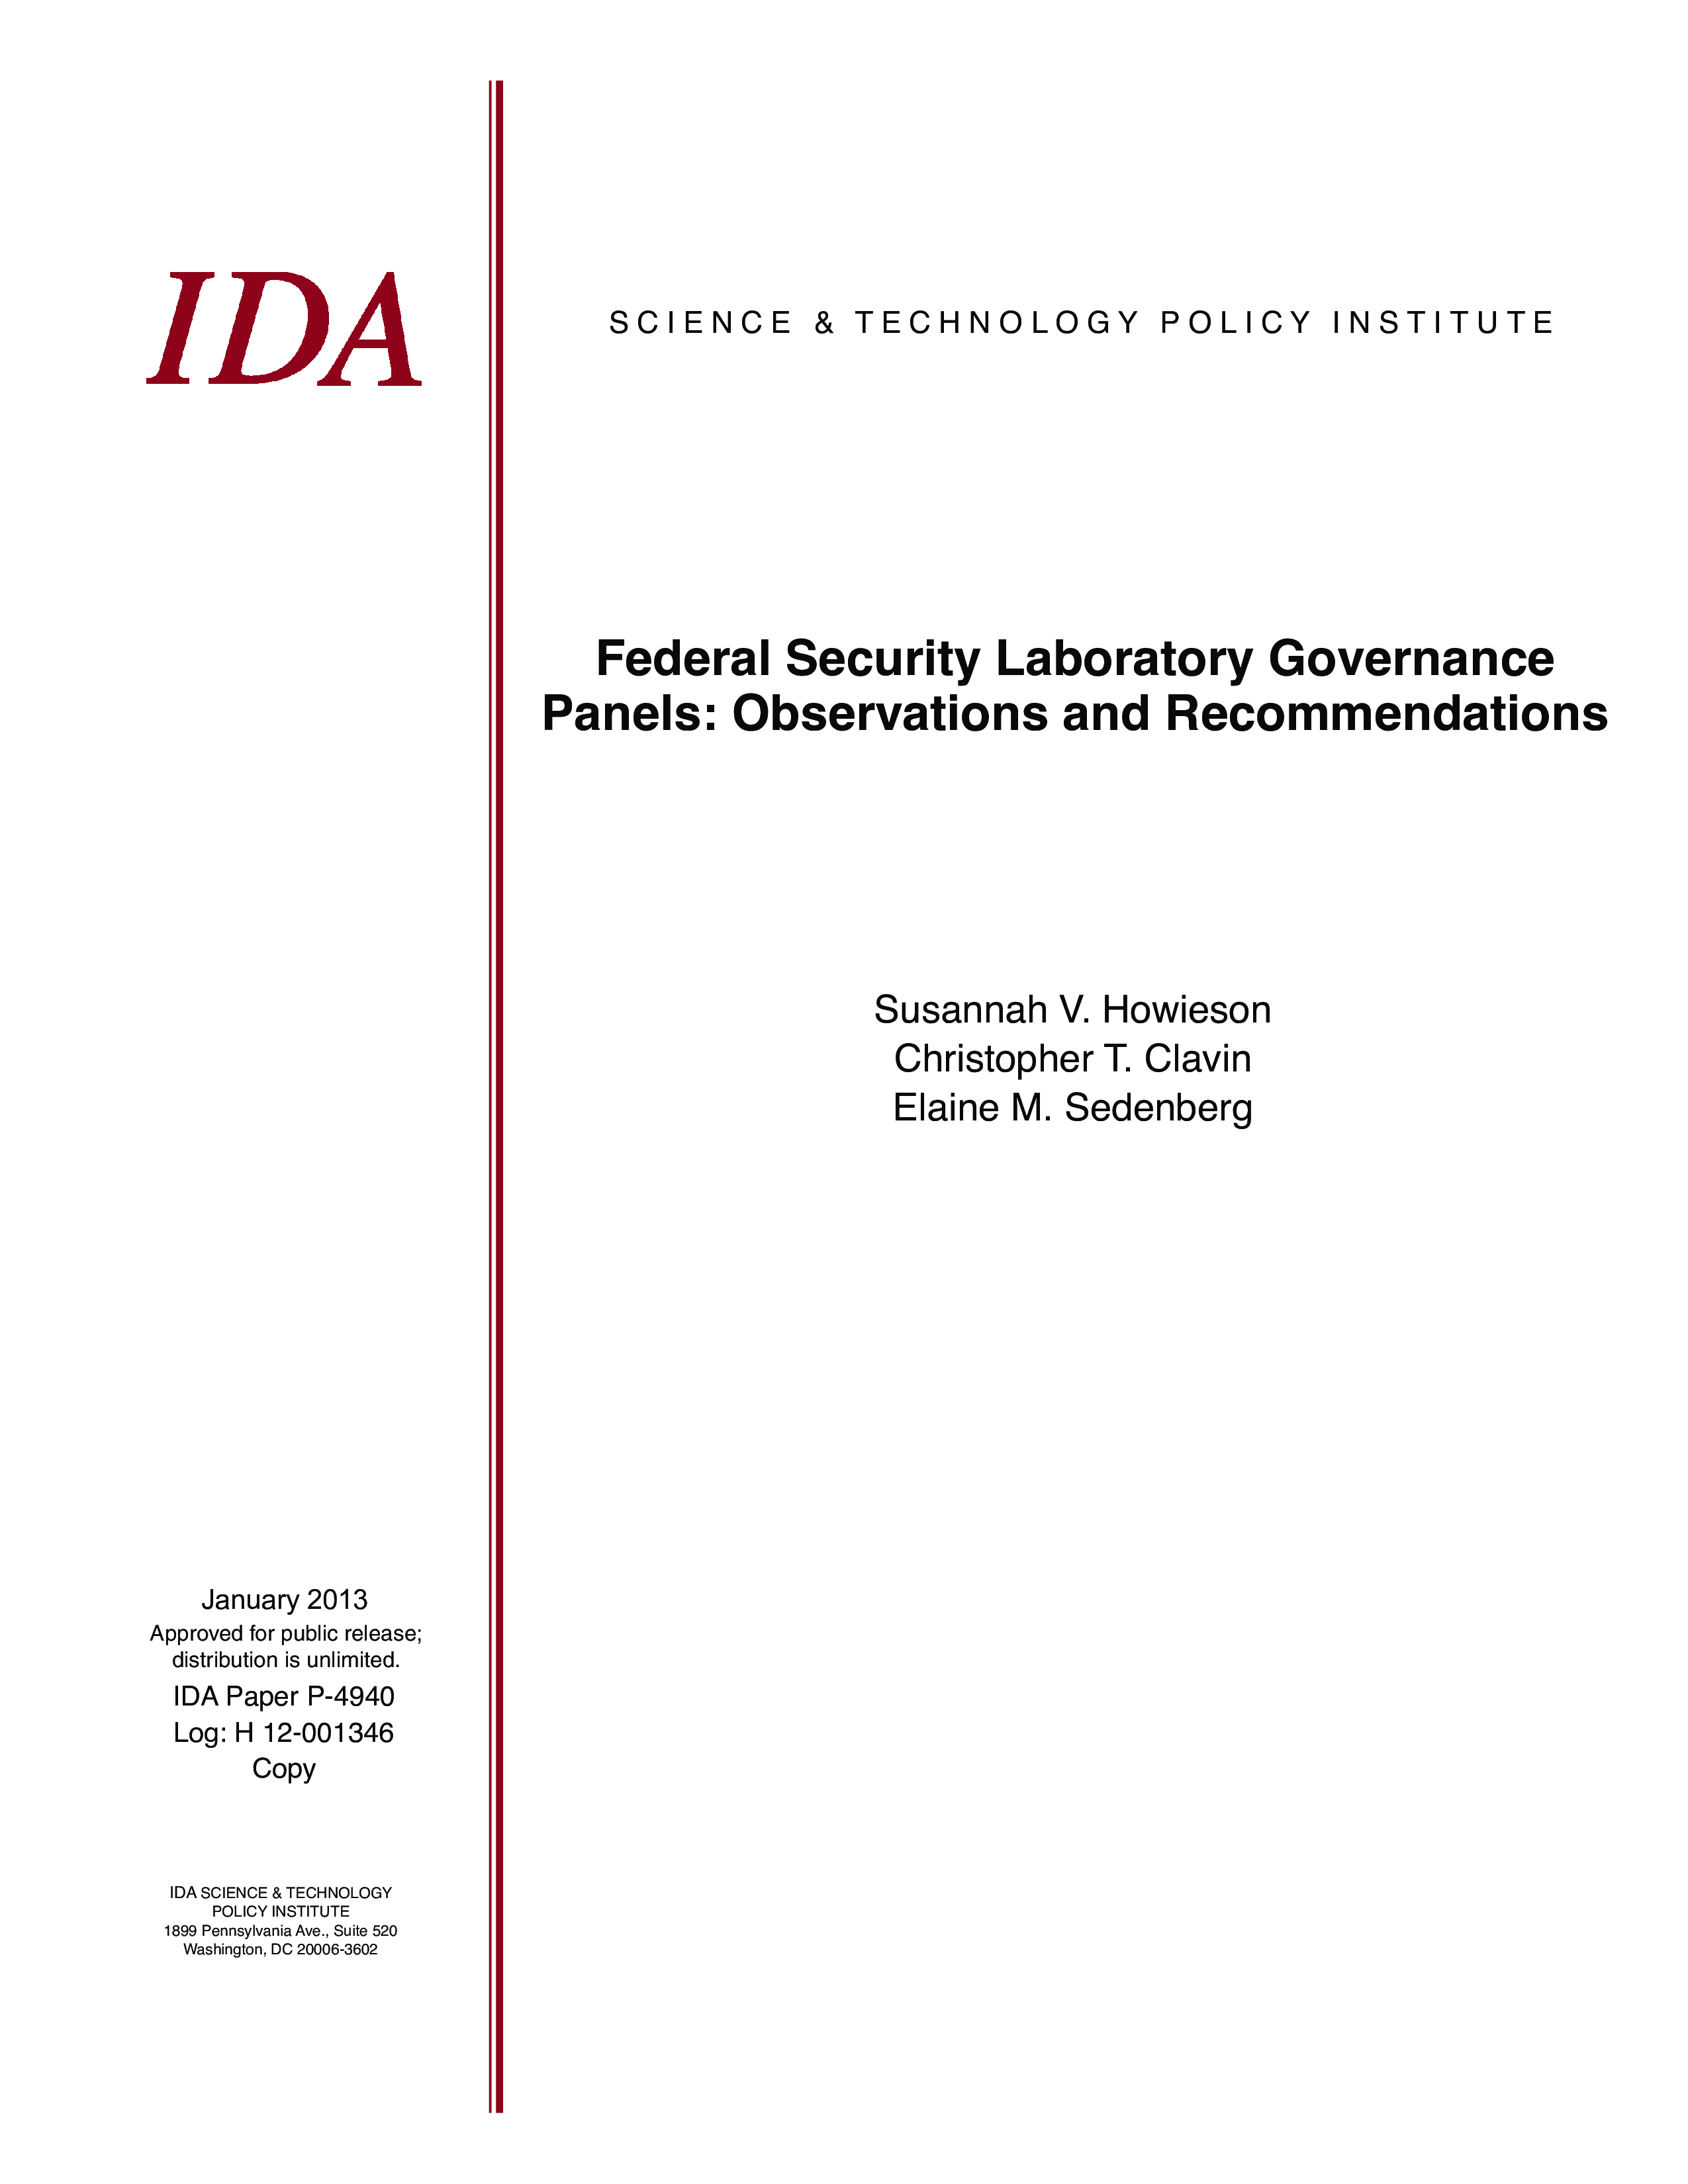 Federal Security Laboratory Governance Panels: Observations and Recommendations